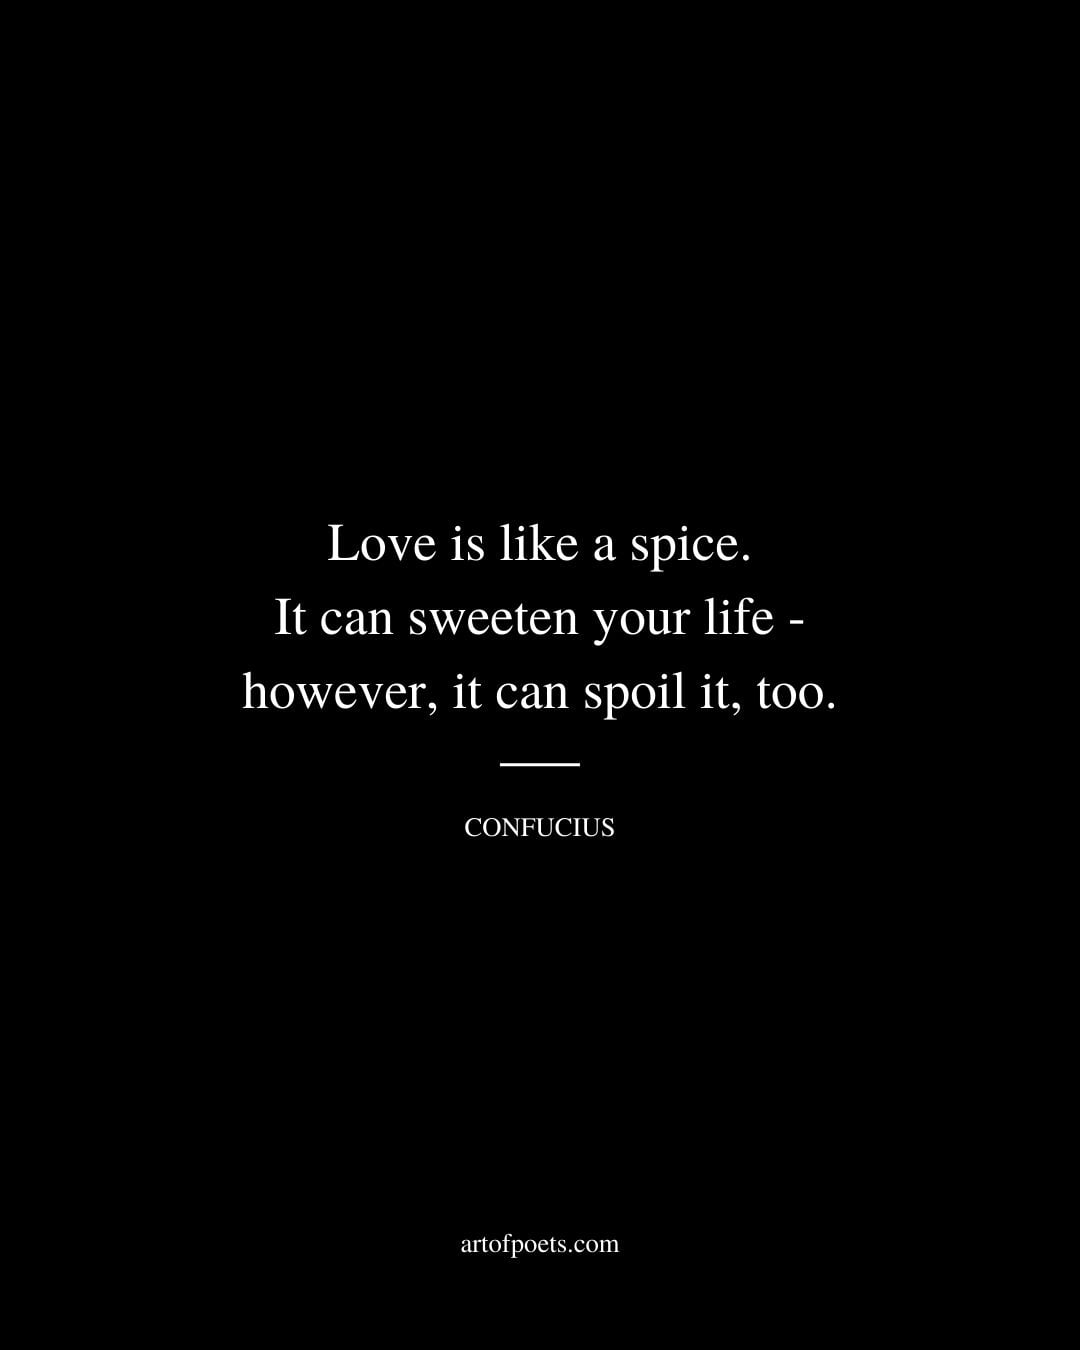 Love is like a spice. It can sweeten your life however it can spoil it too